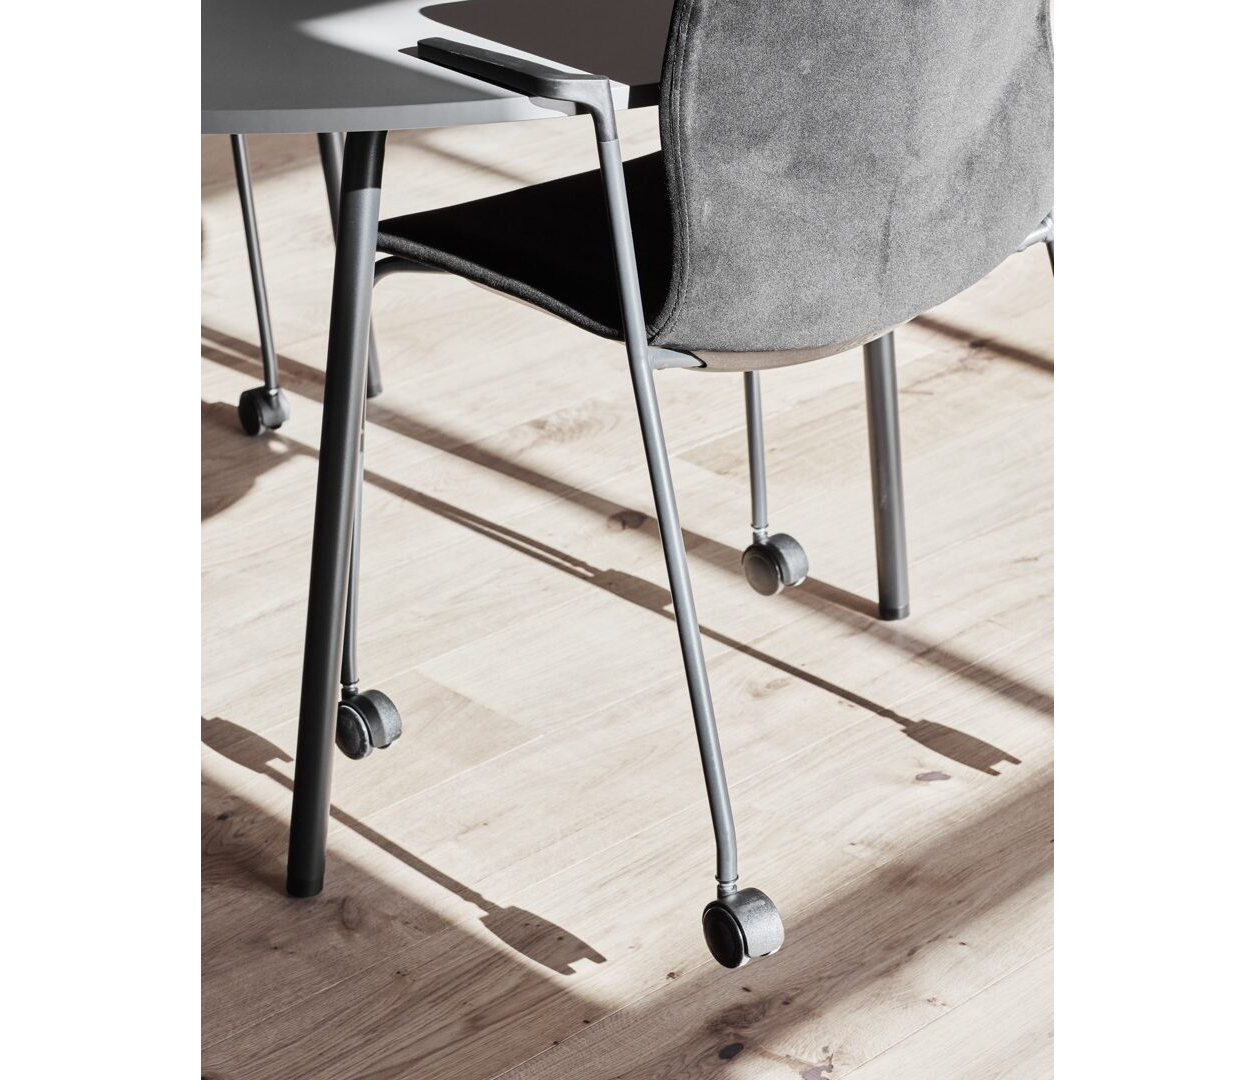 OCEE&FOUR – Chairs – FourSure 77 – Details Image 3 Large